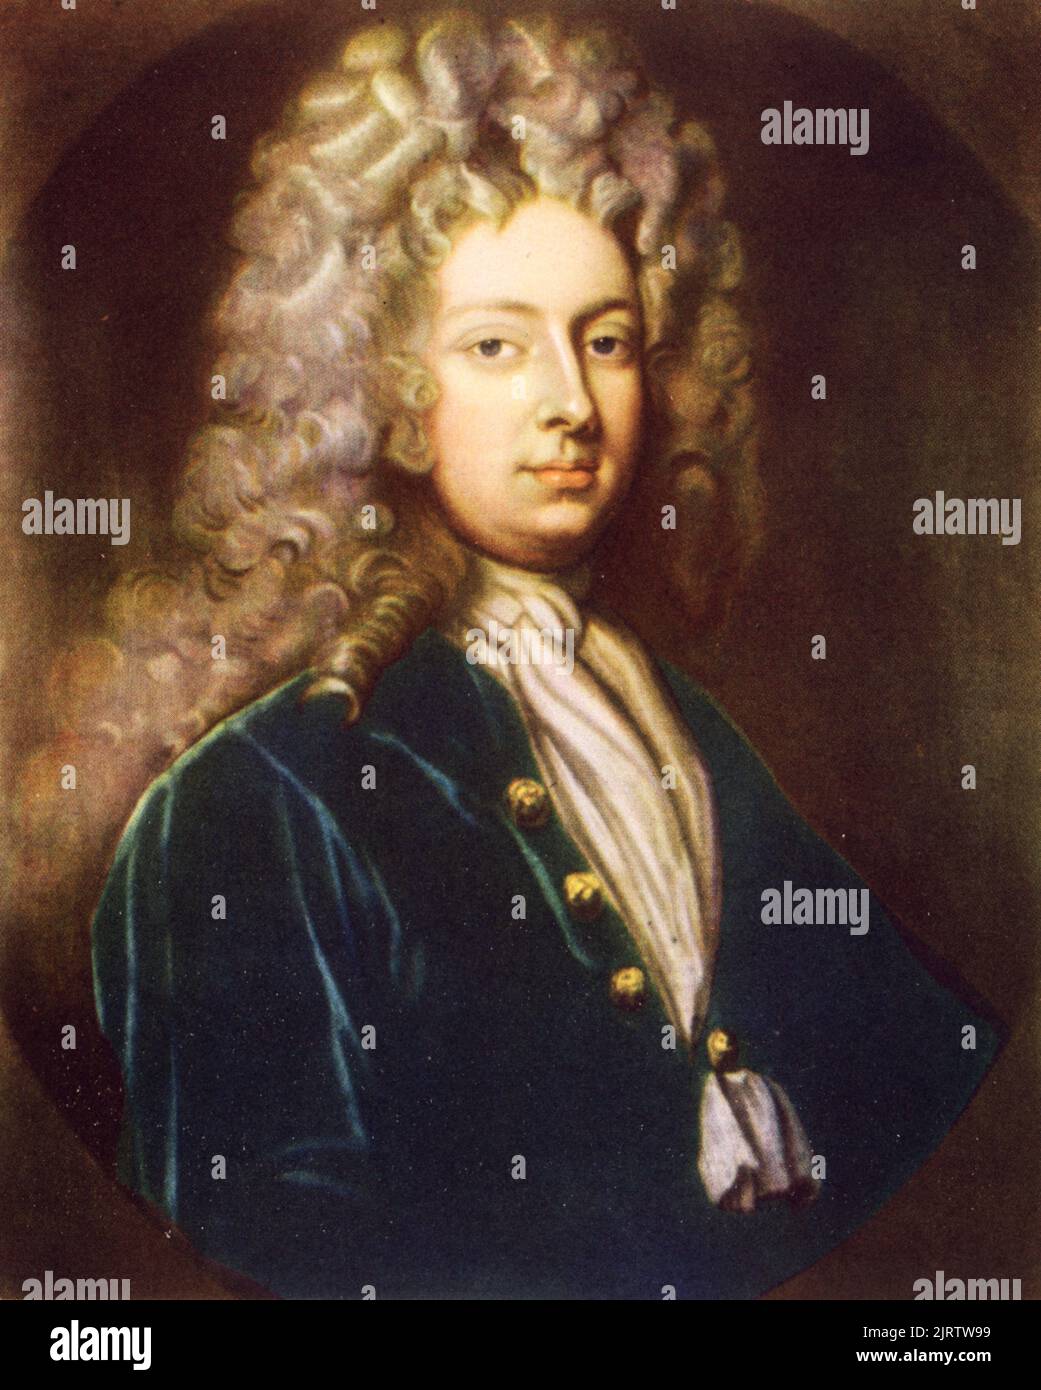 William Congreve (1670-1729), c1709. After Godfrey Kneller (1646-1723). William Congreve (1670-1729), English playwright and poet of the Restoration period. Stock Photo